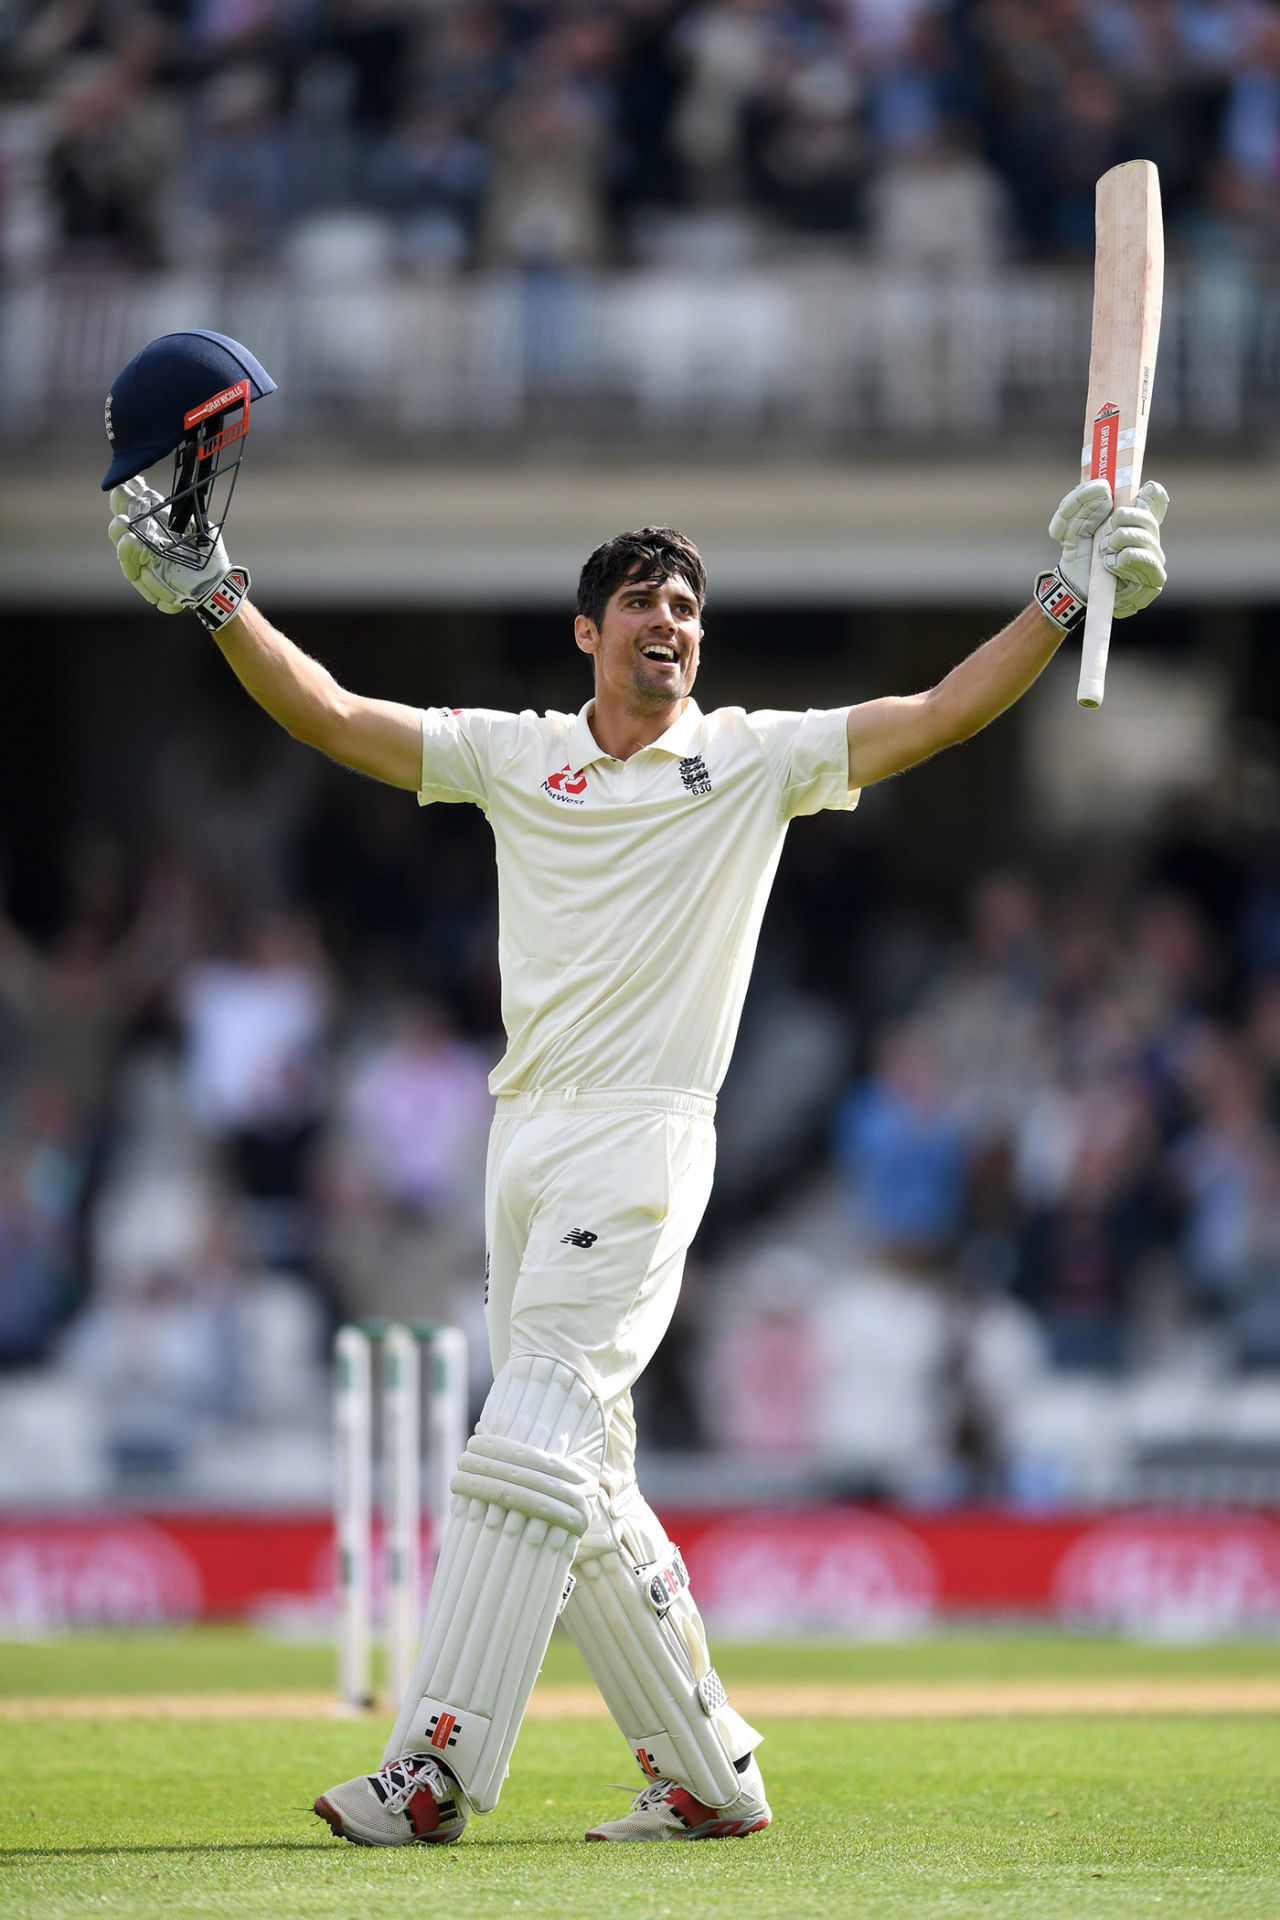 The magic moment: Alastair Cook reaches his century, England v India, 5th Test, The Oval, 4th day, September 10, 2018